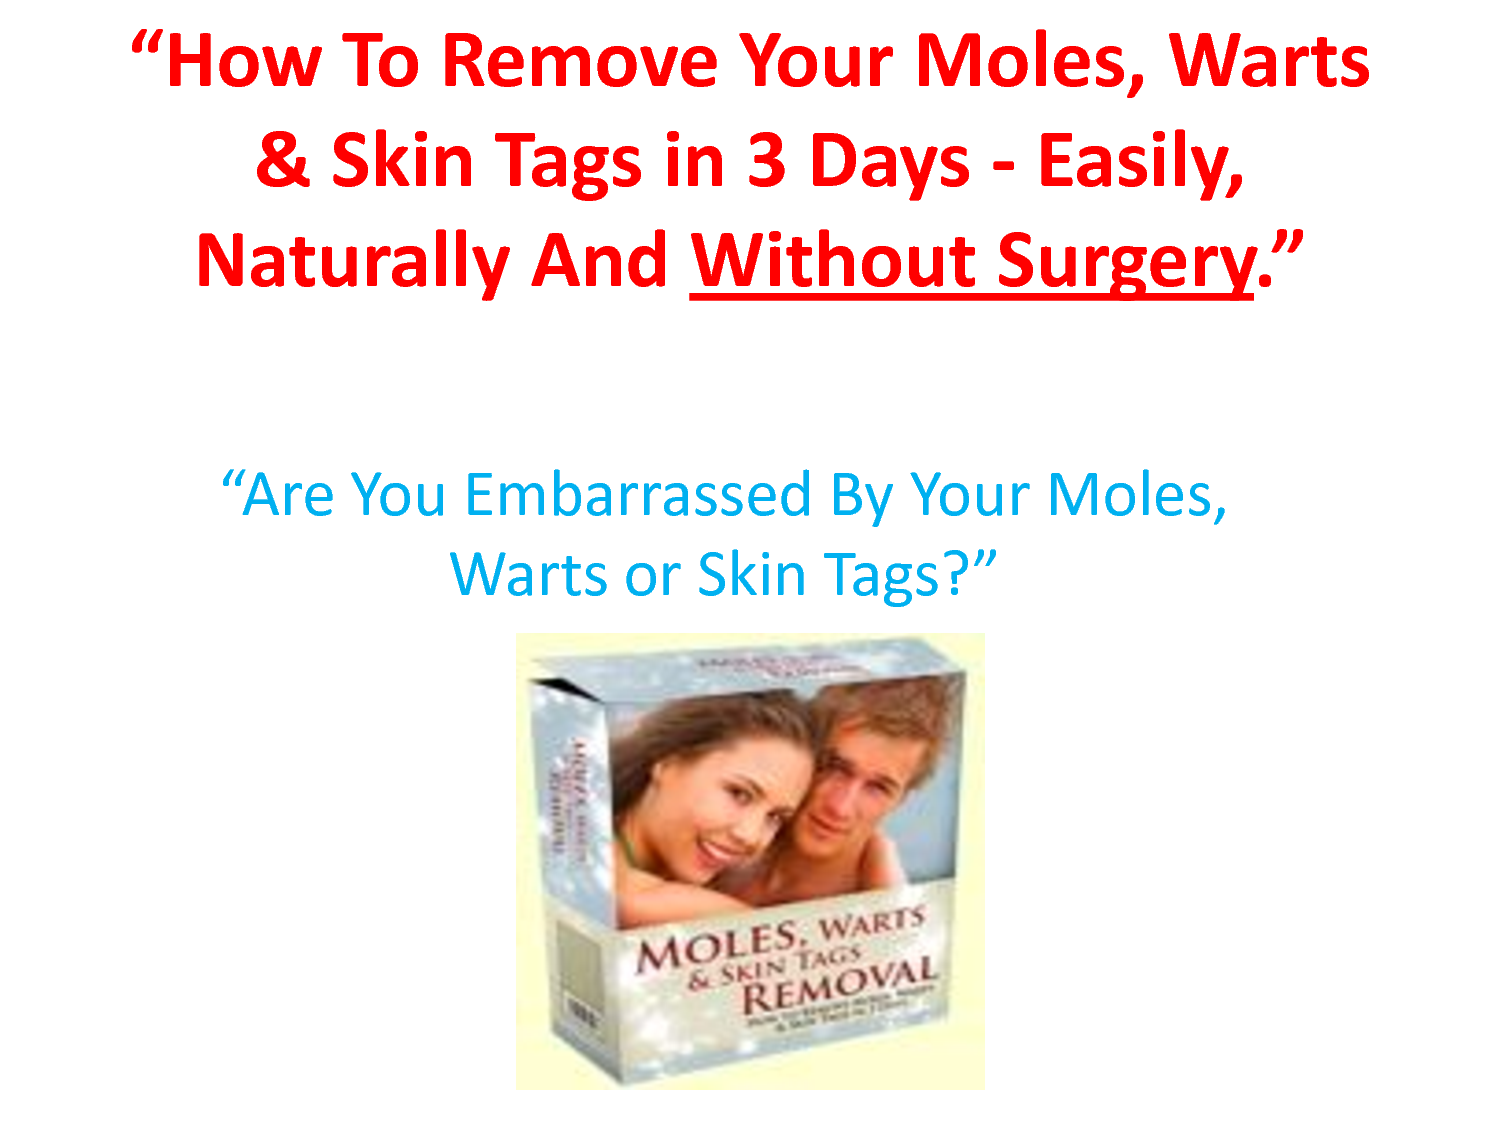 moles-skin-removal How To Remove Your Moles, Warts And Skin Tags Easily and Permanently?